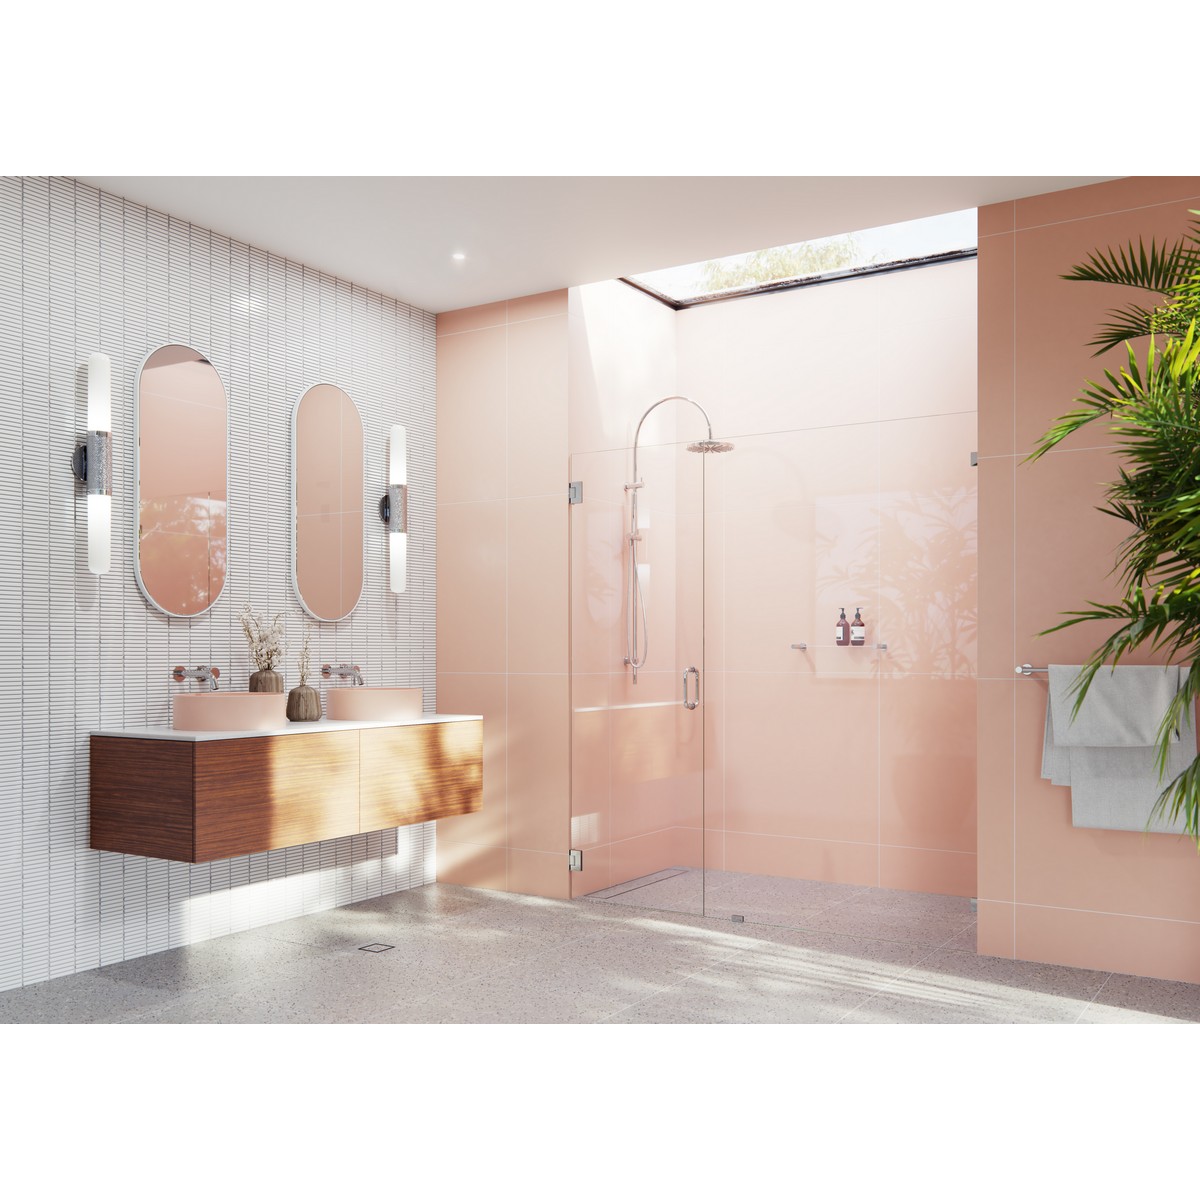 GLASS WAREHOUSE GW-WH-78 ILLUME 78 W X 78 H WALL HINGED FULLY FRAMELESS GLASS SHOWER ENCLOSURE